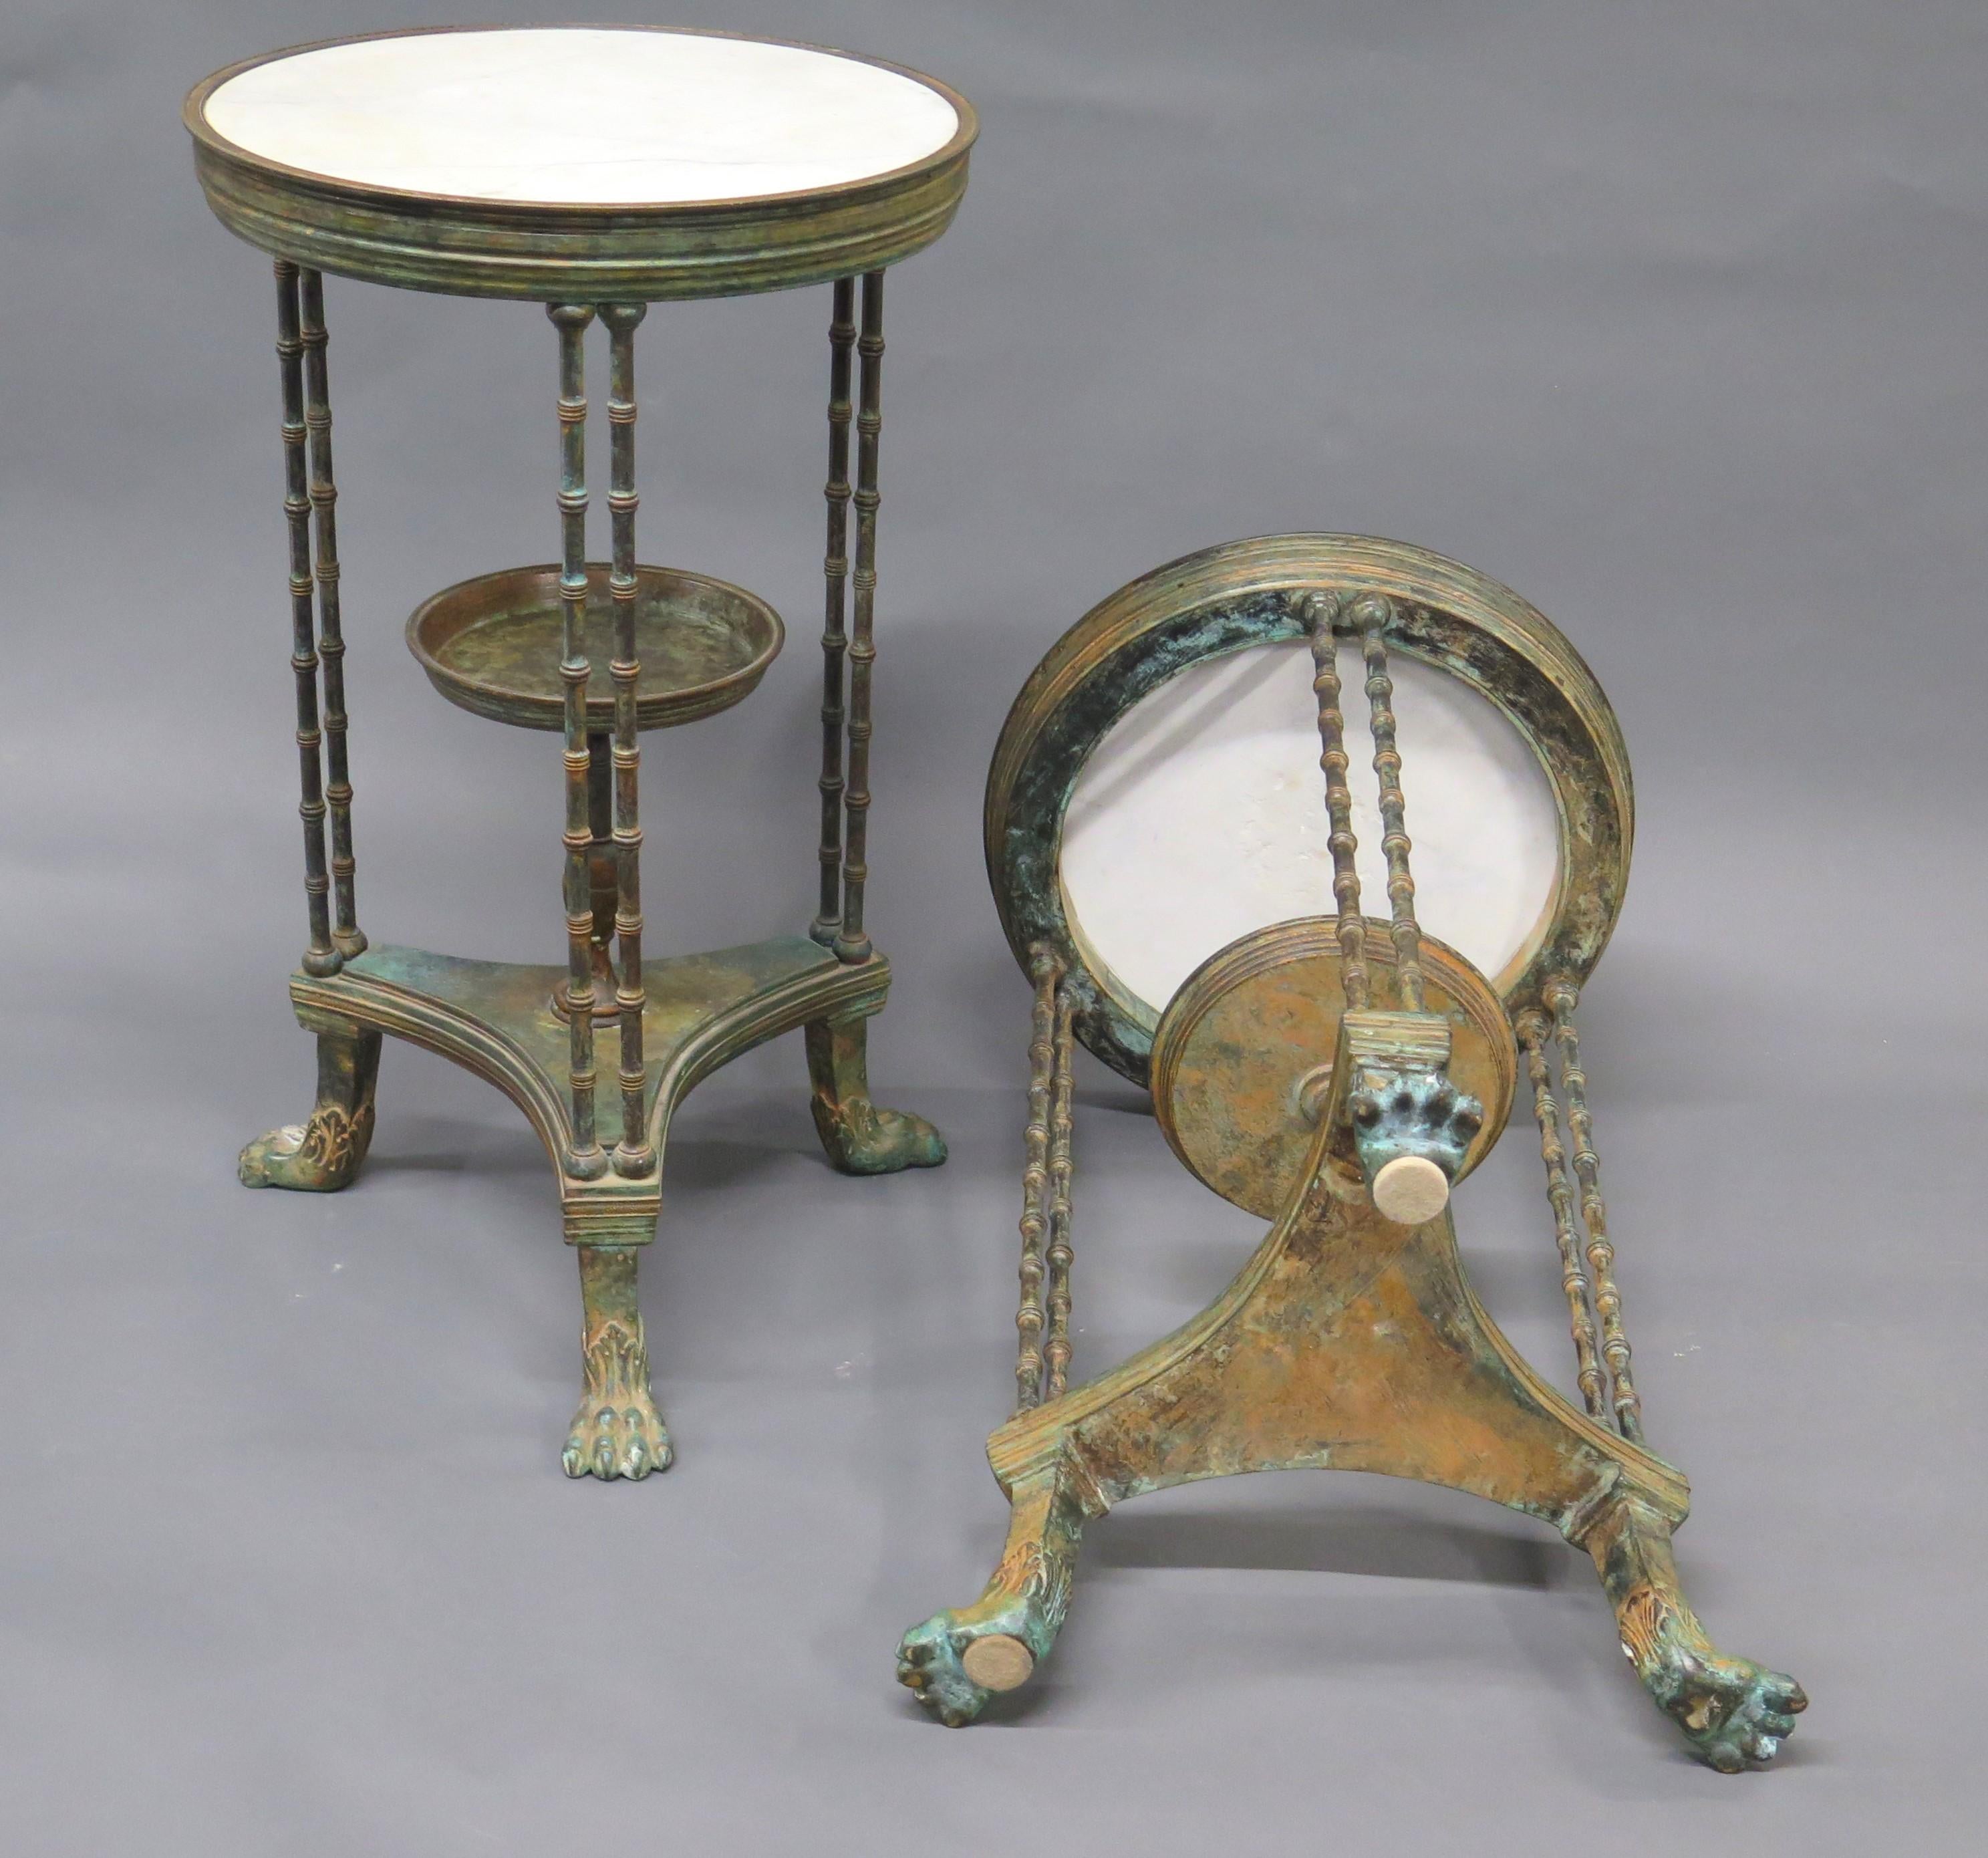 Pair of Louis XVI-Style Patinated Bronze Gueridons (Tables) For Sale 7